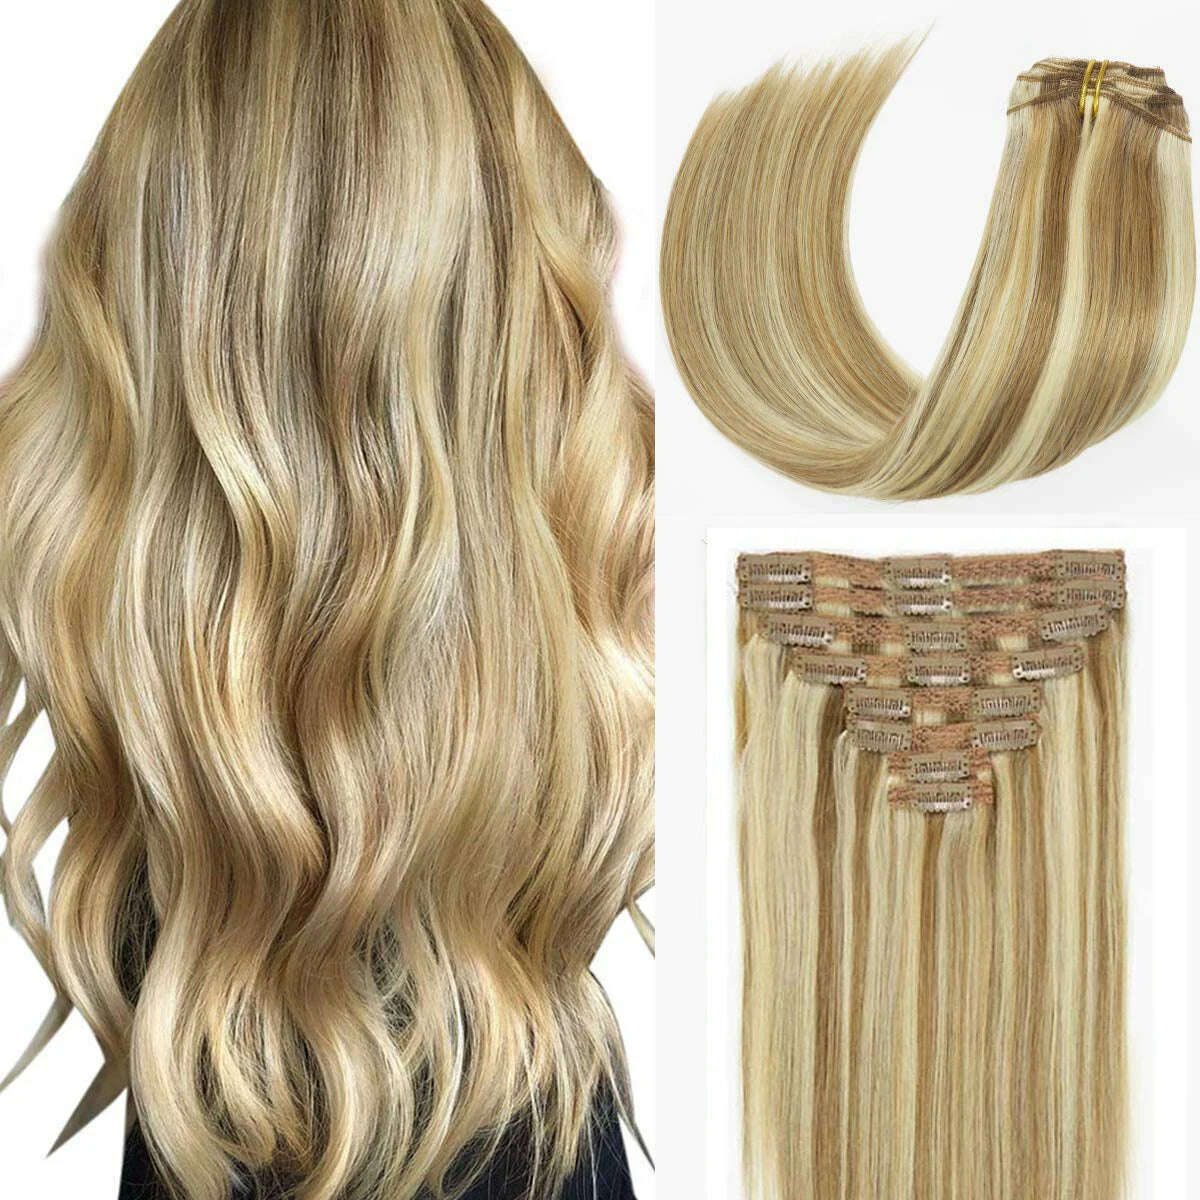 KIMLUD, 120G Clip In Hair Extension Human Hair Color P8/613 Straight Brazilian 100% Human Hair Extension Clip In 8 Pieces/Sets Full Head, P8-613 / 120g/Set / 16inches, KIMLUD Womens Clothes